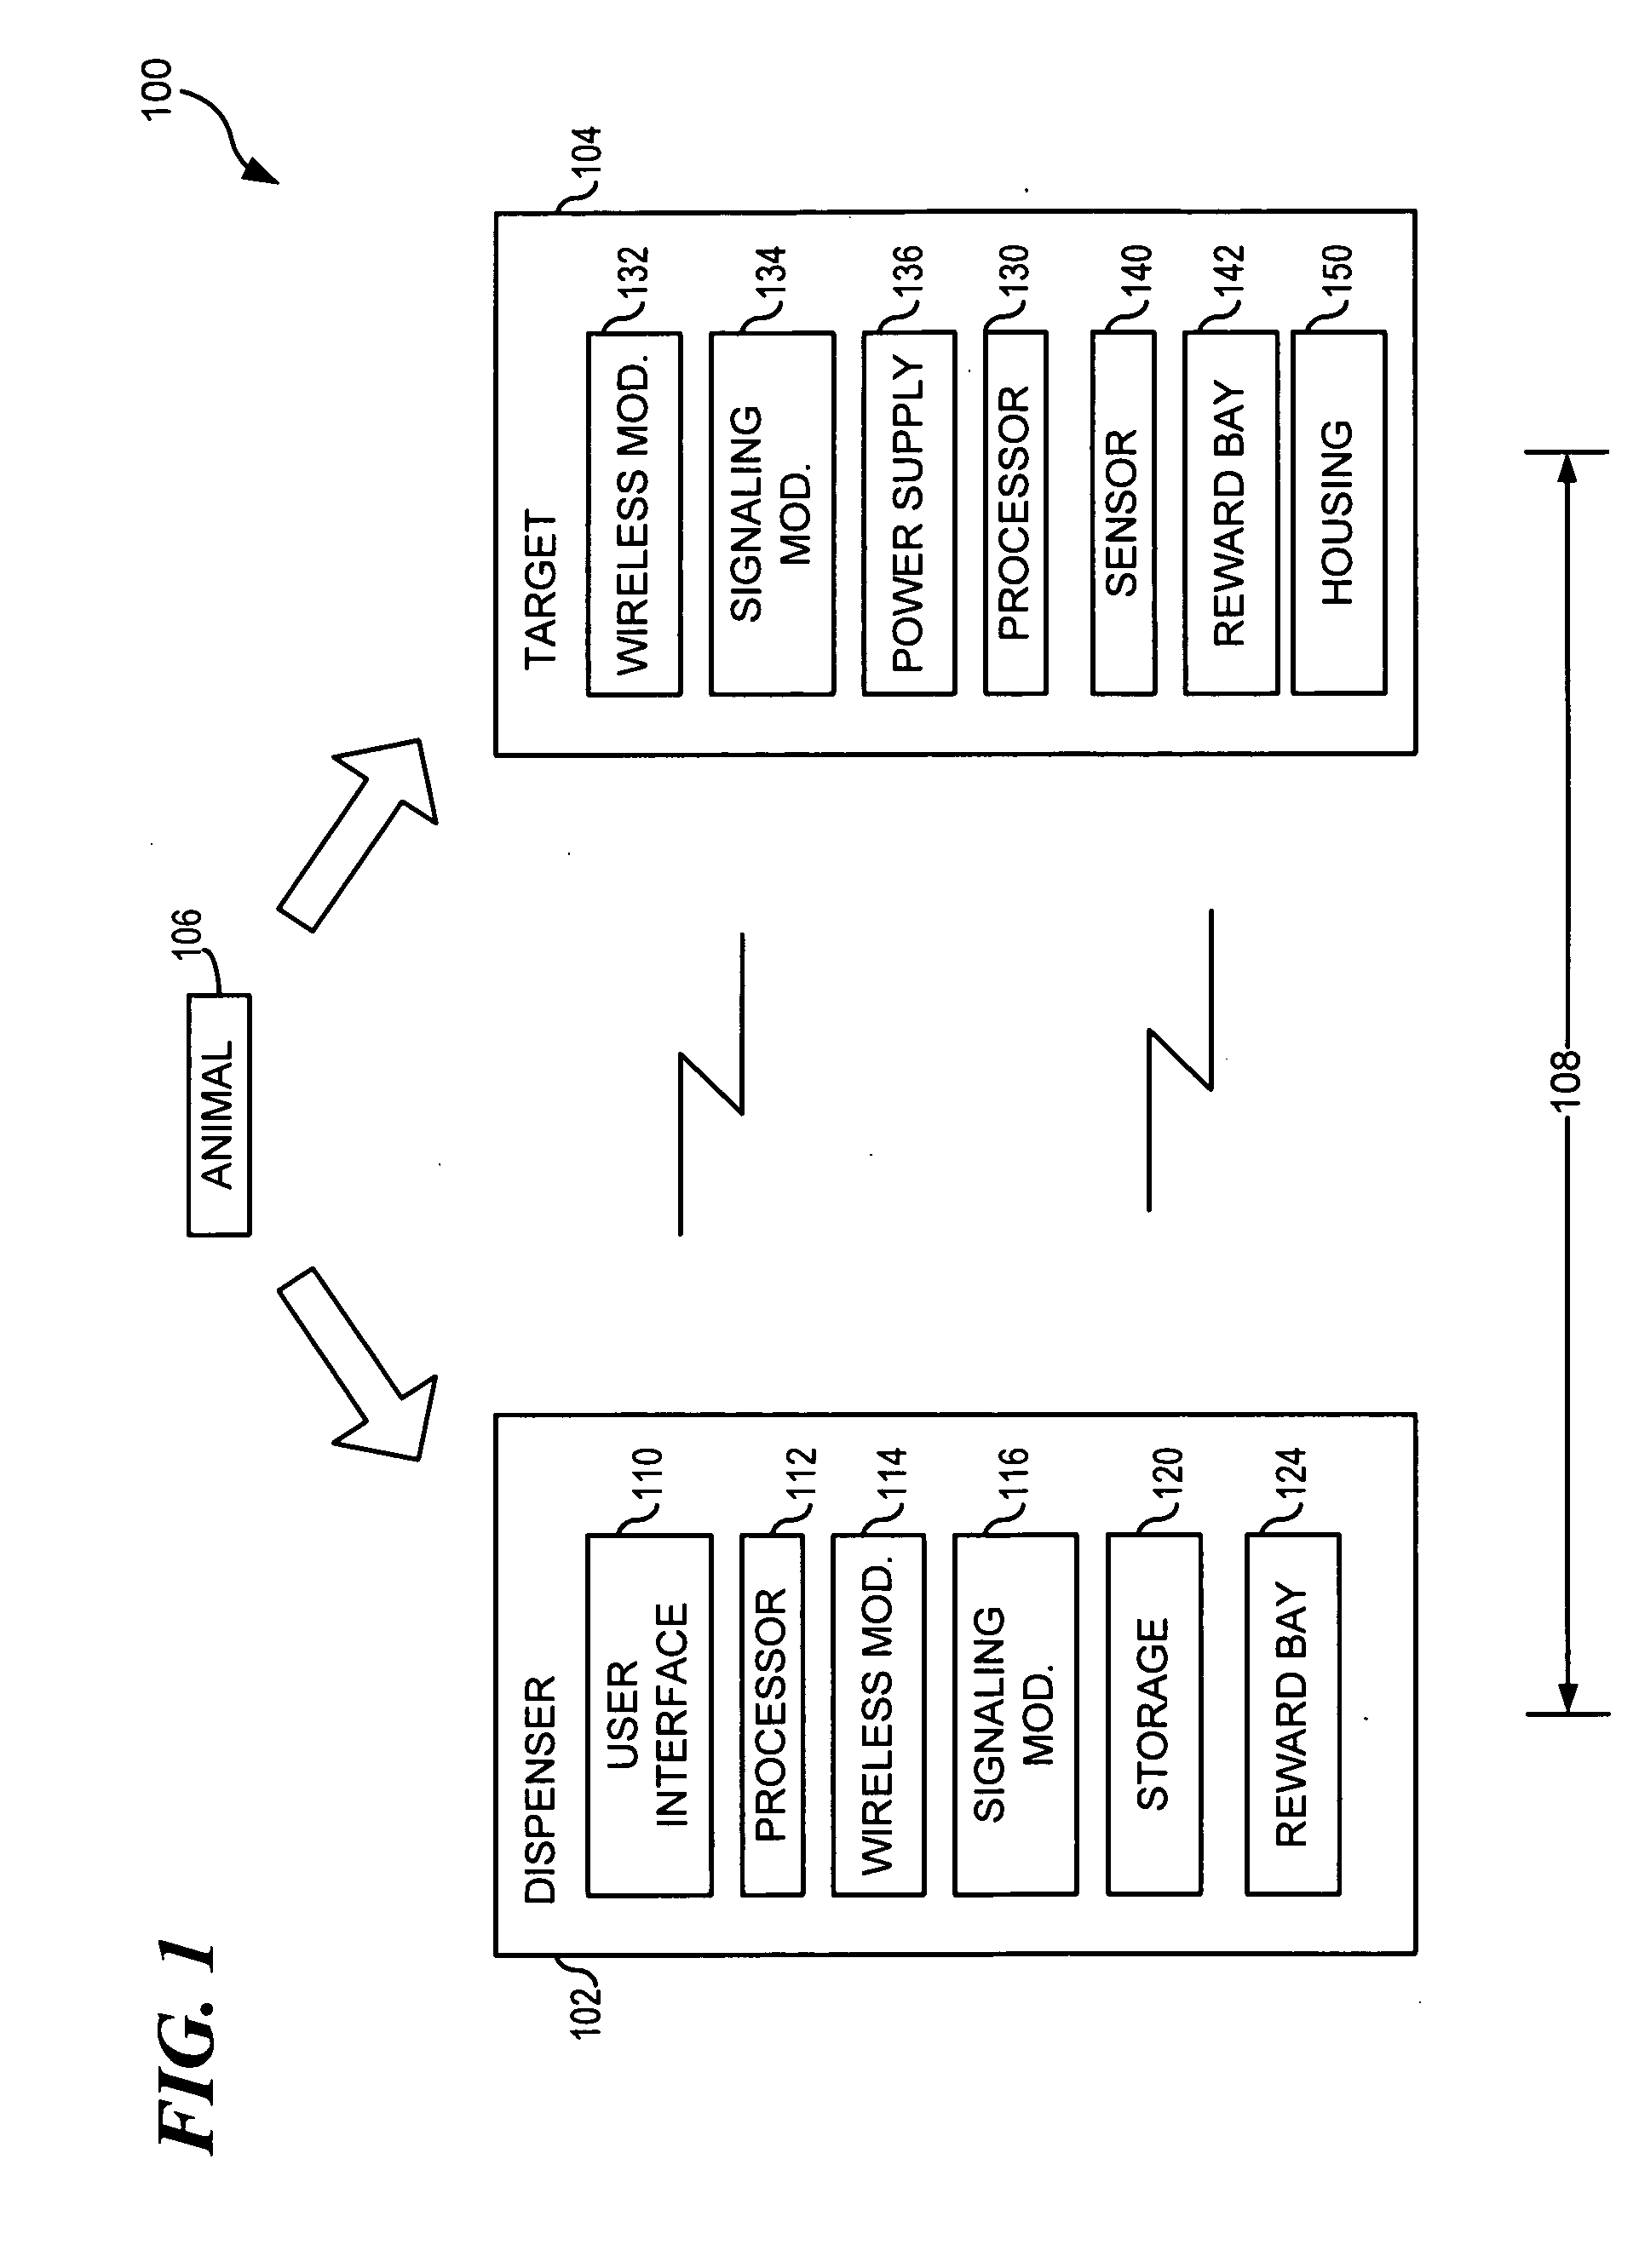 System and method for training an animal